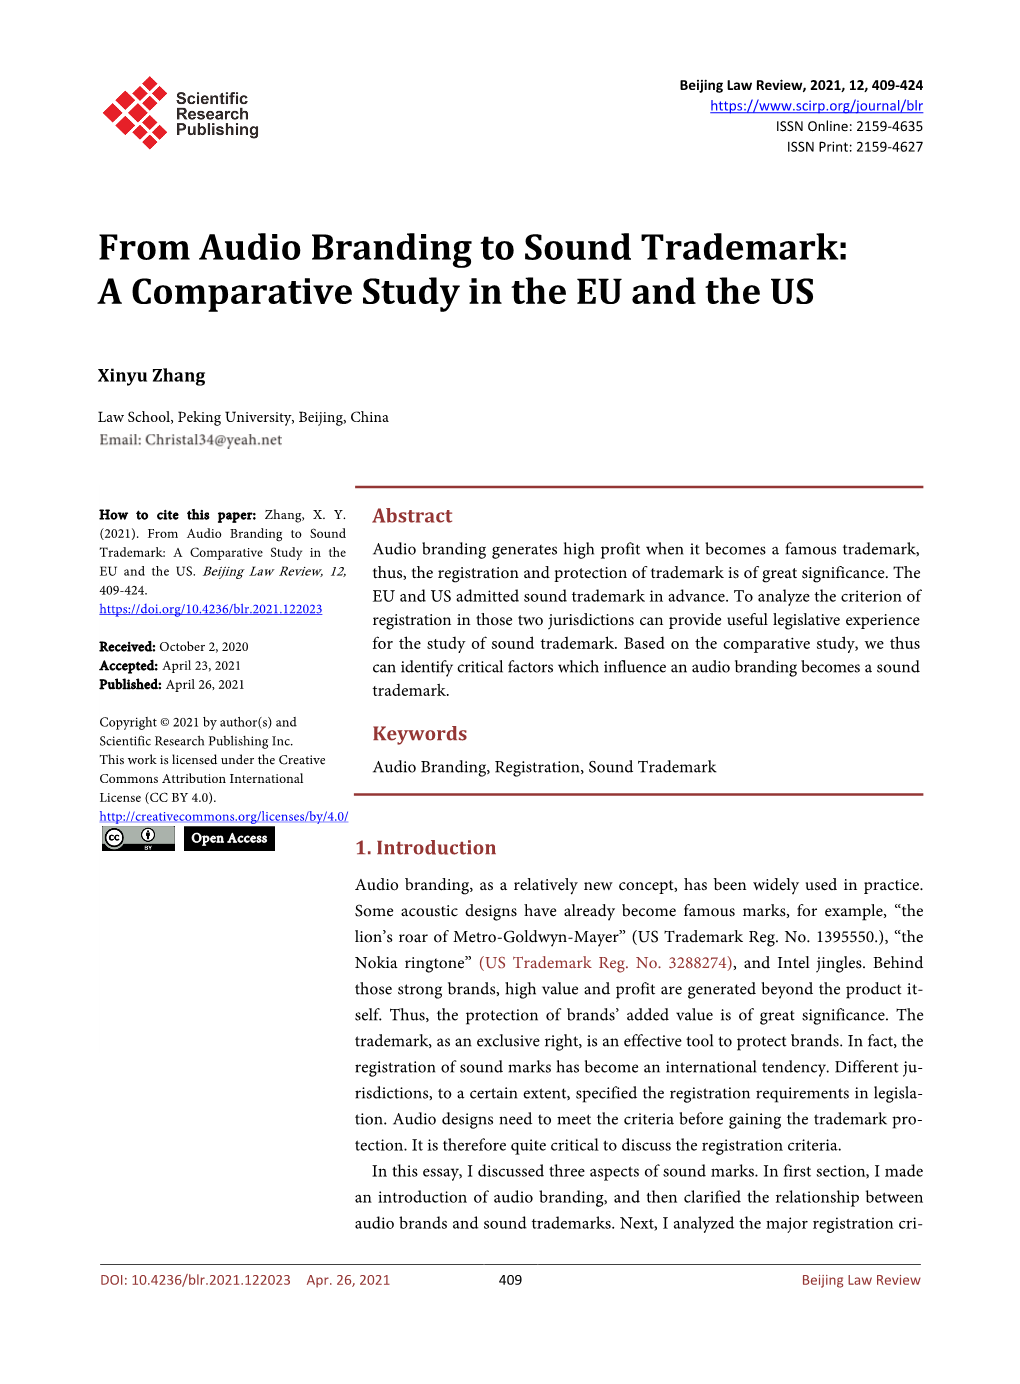 From Audio Branding to Sound Trademark: a Comparative Study in the EU and the US